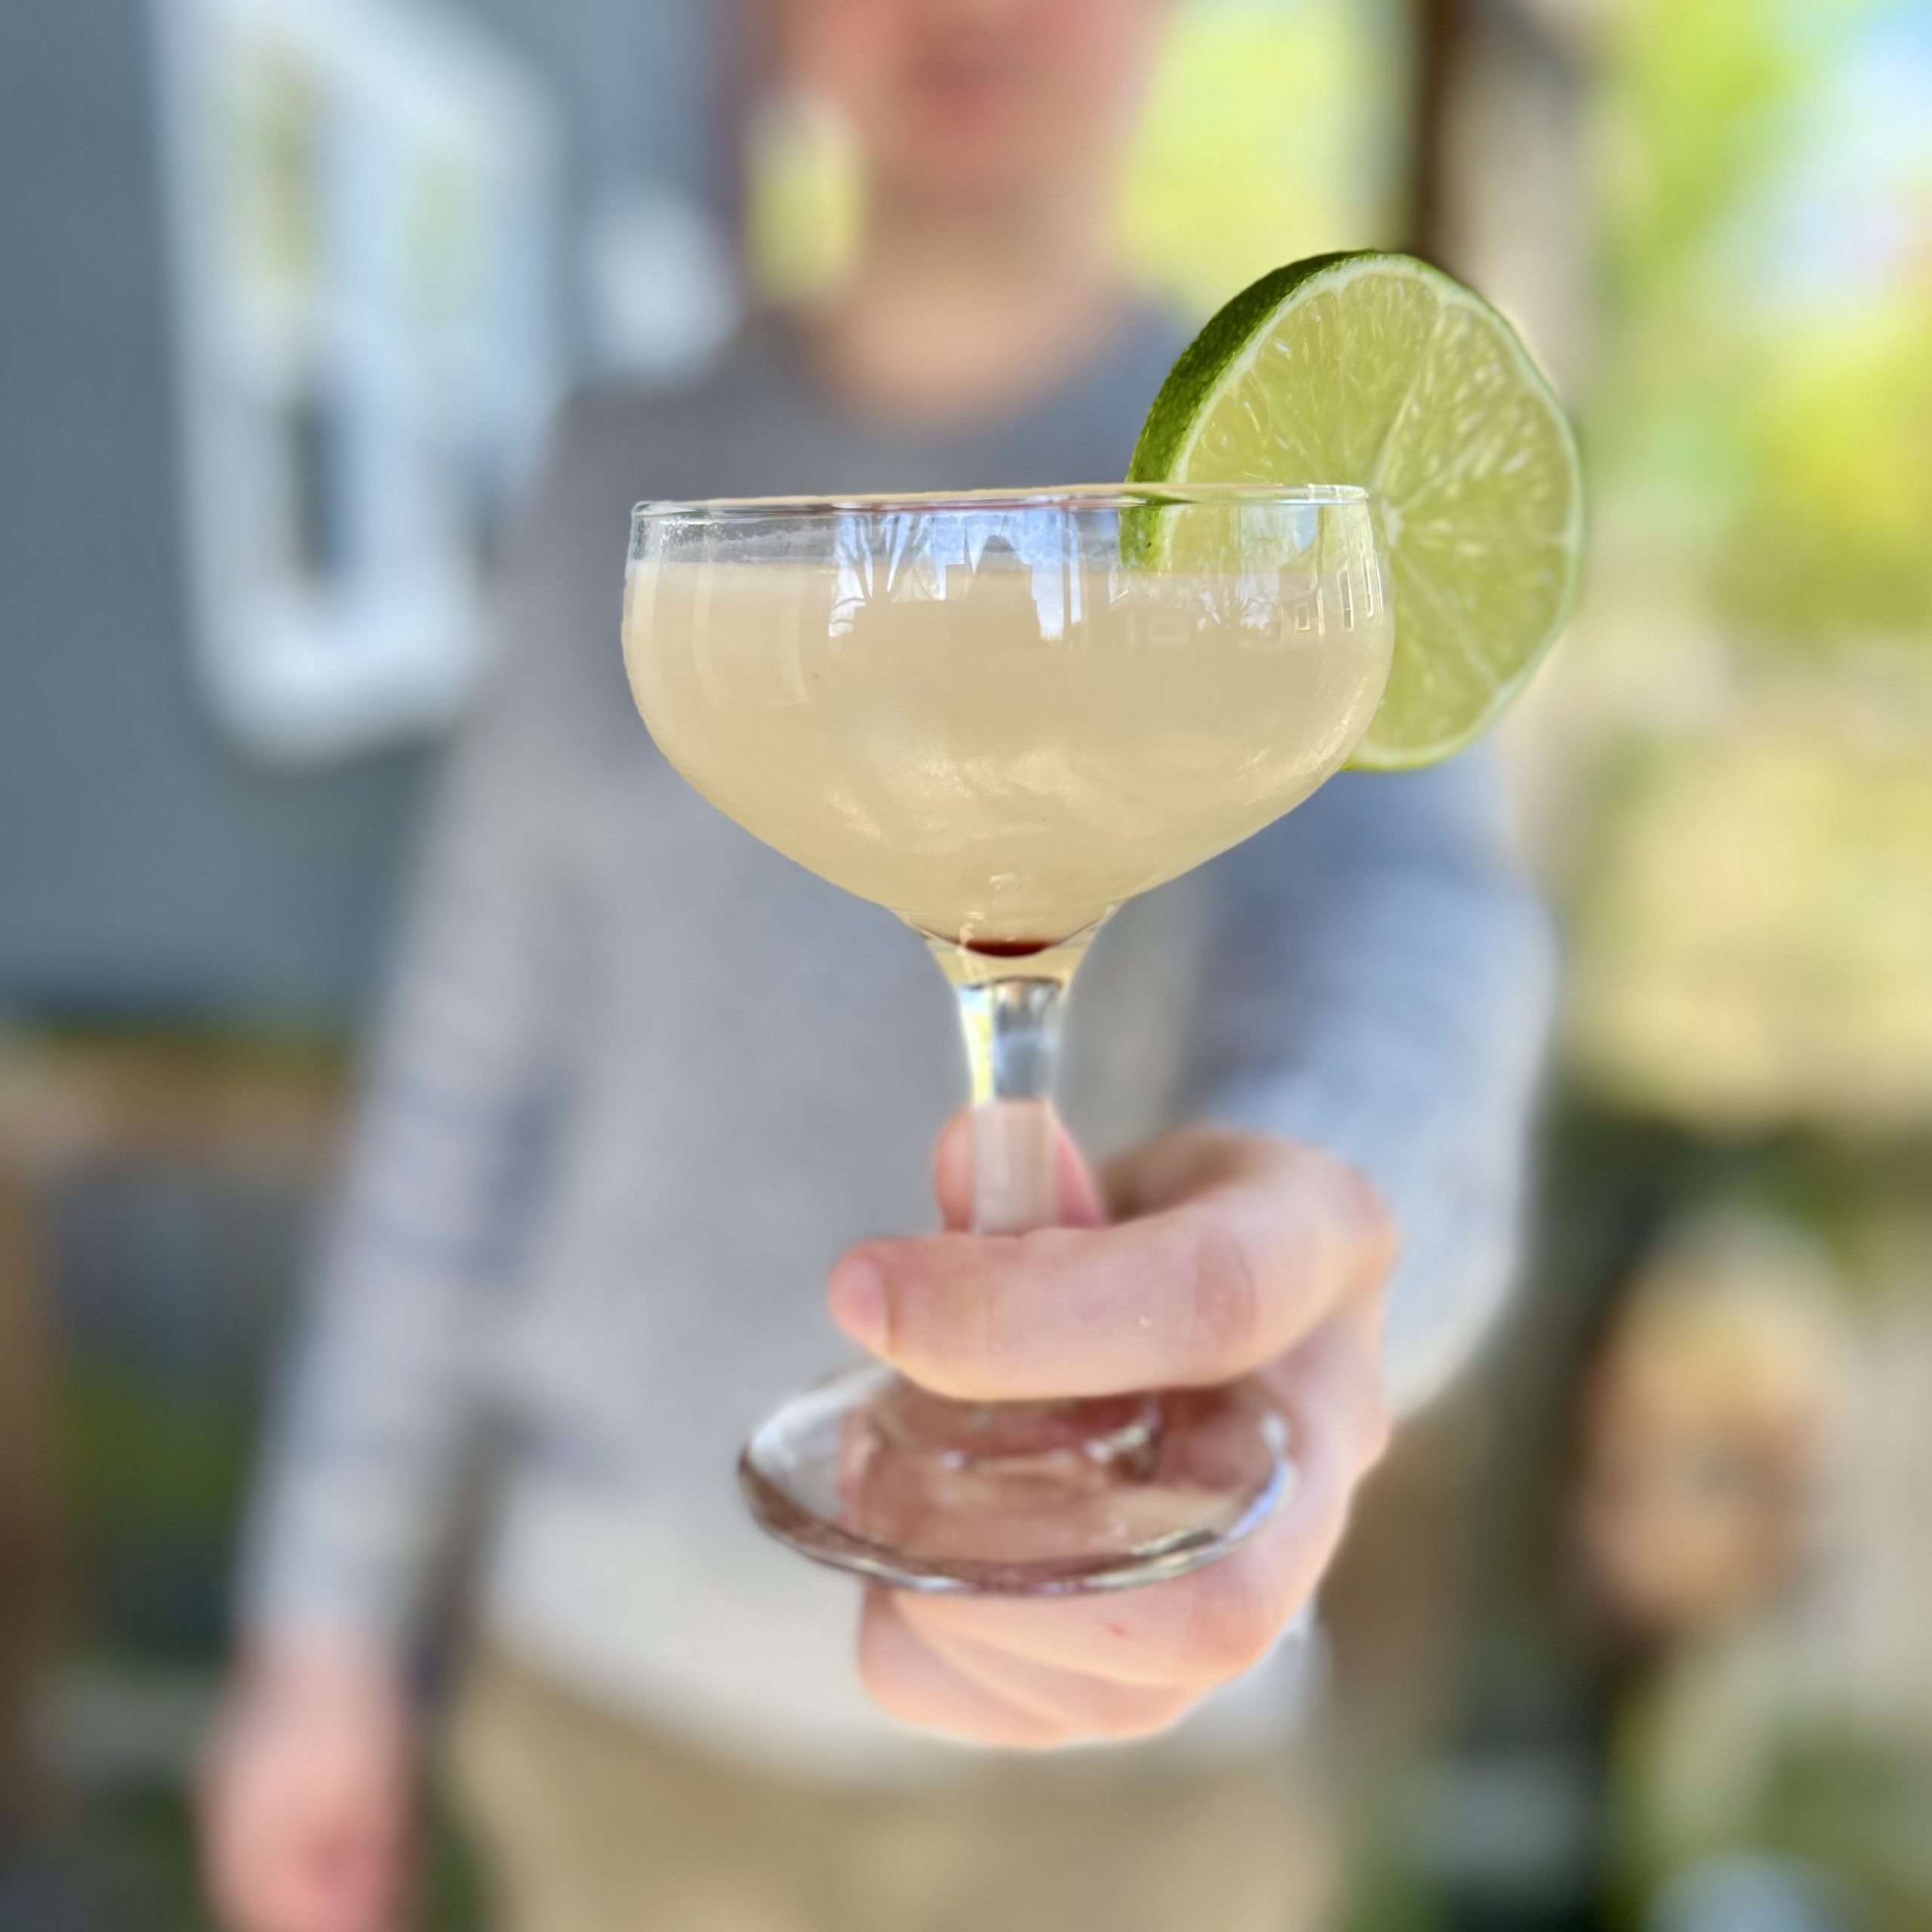 A Hemingway Daiquiri garnished with a lime held toward the camera held by a blurred out man in the background.